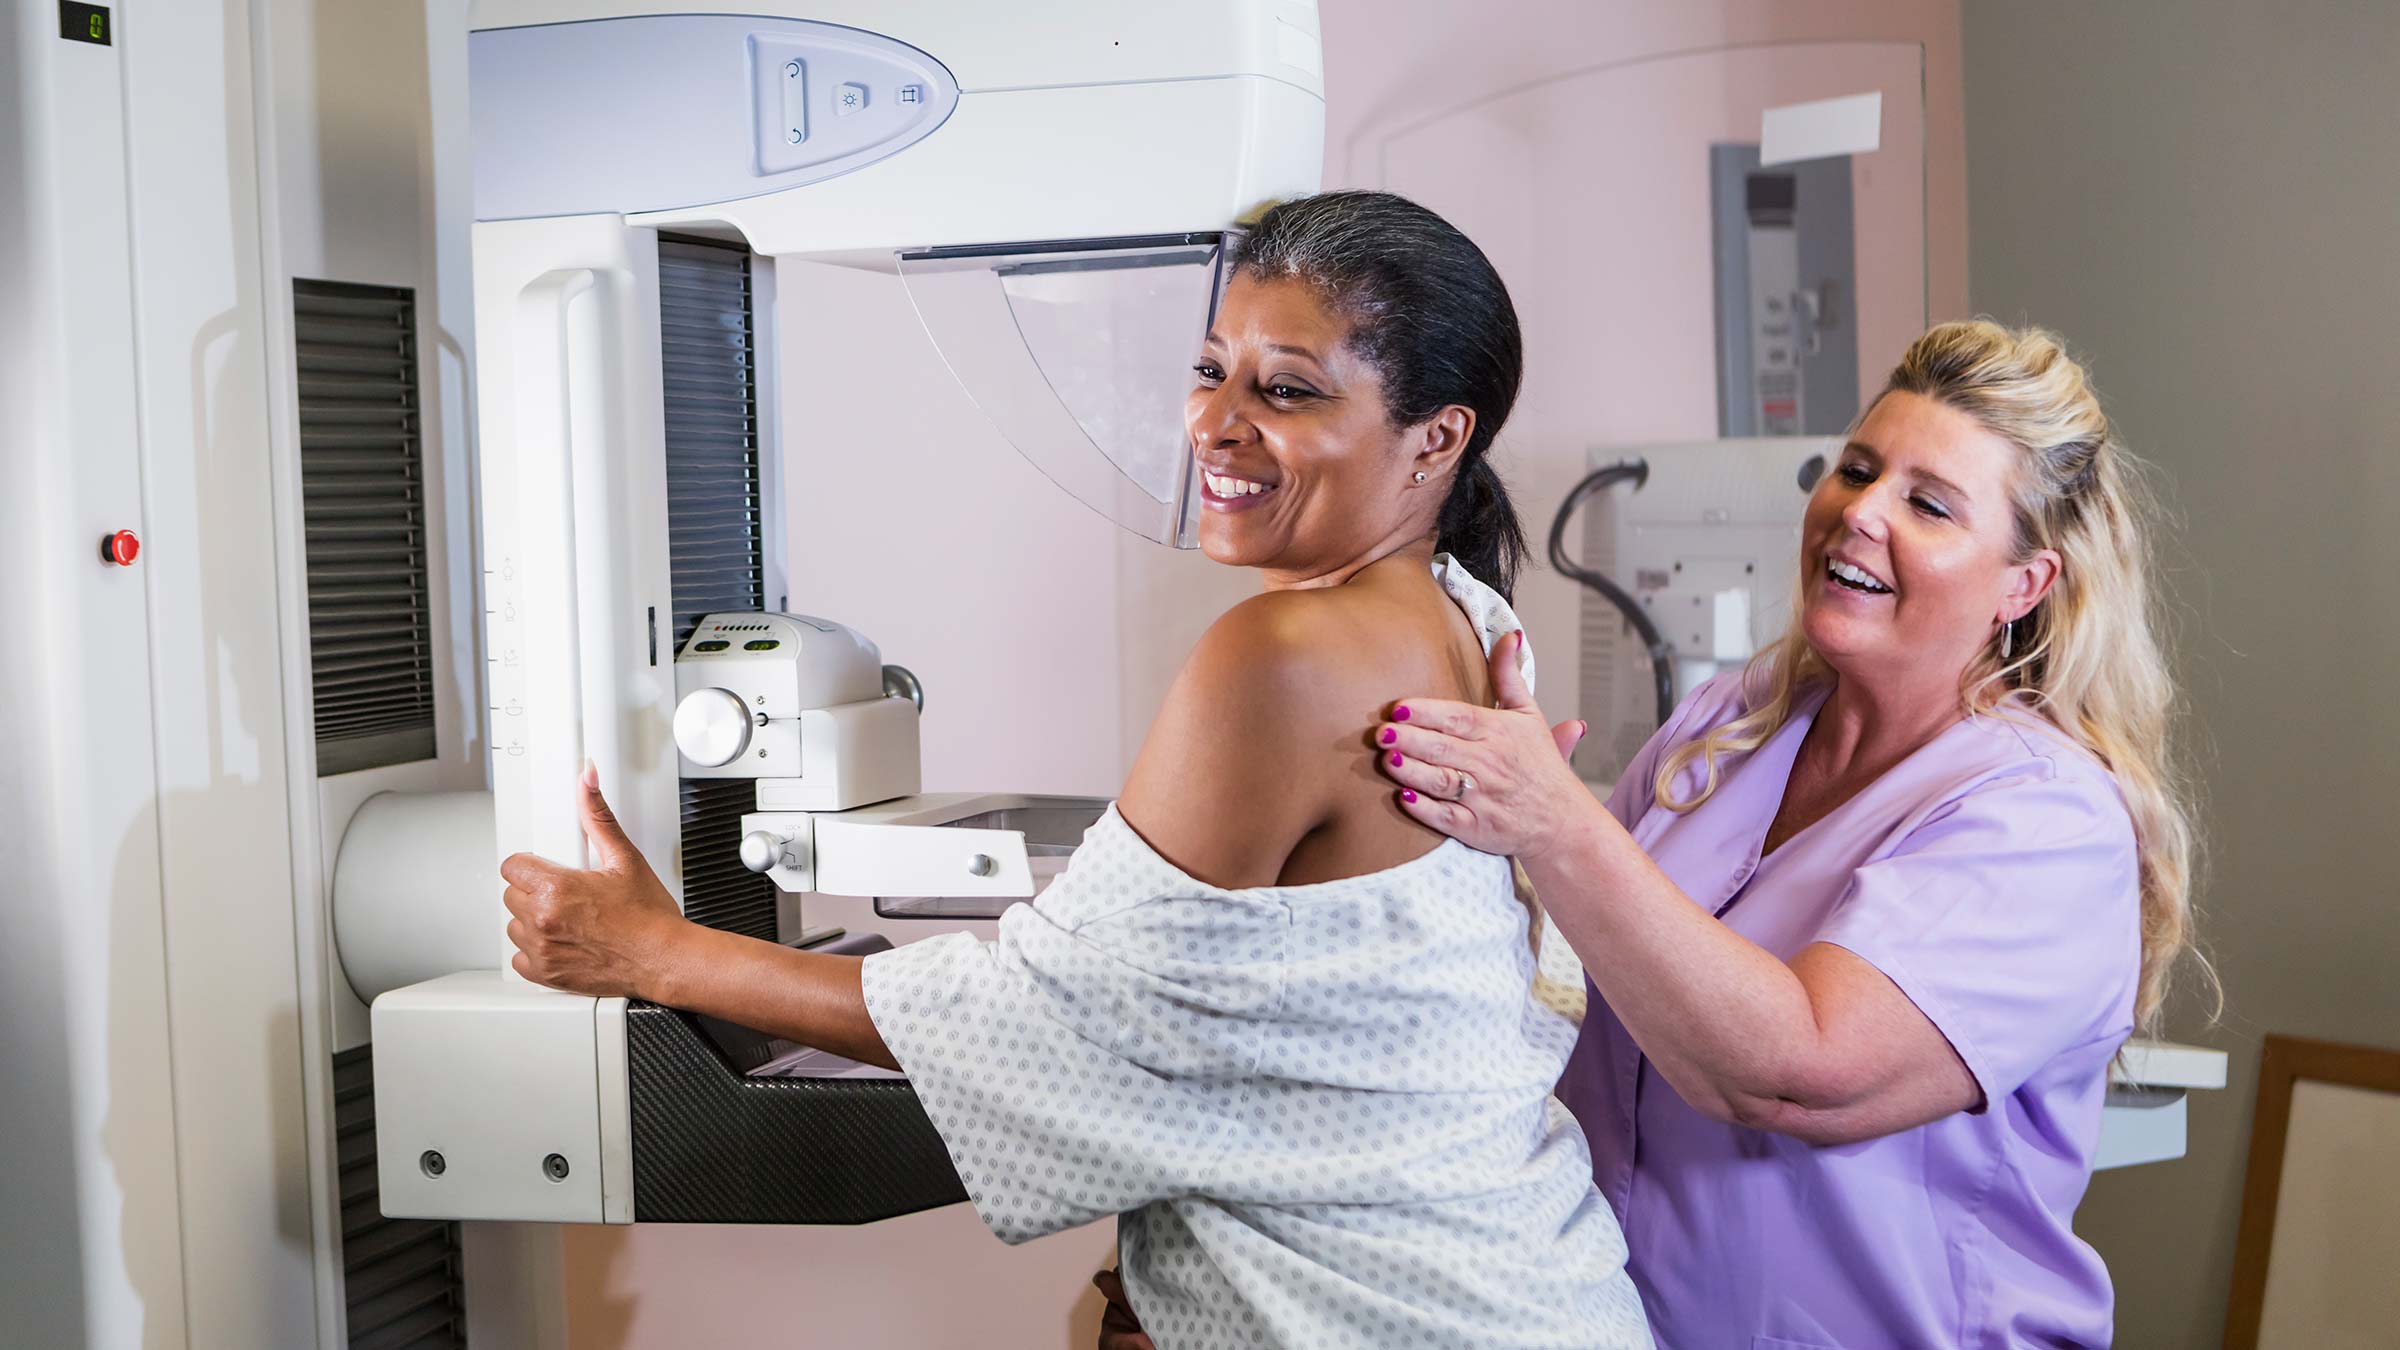 When should you get a mammogram? New recommendations say age 40 for average-risk women